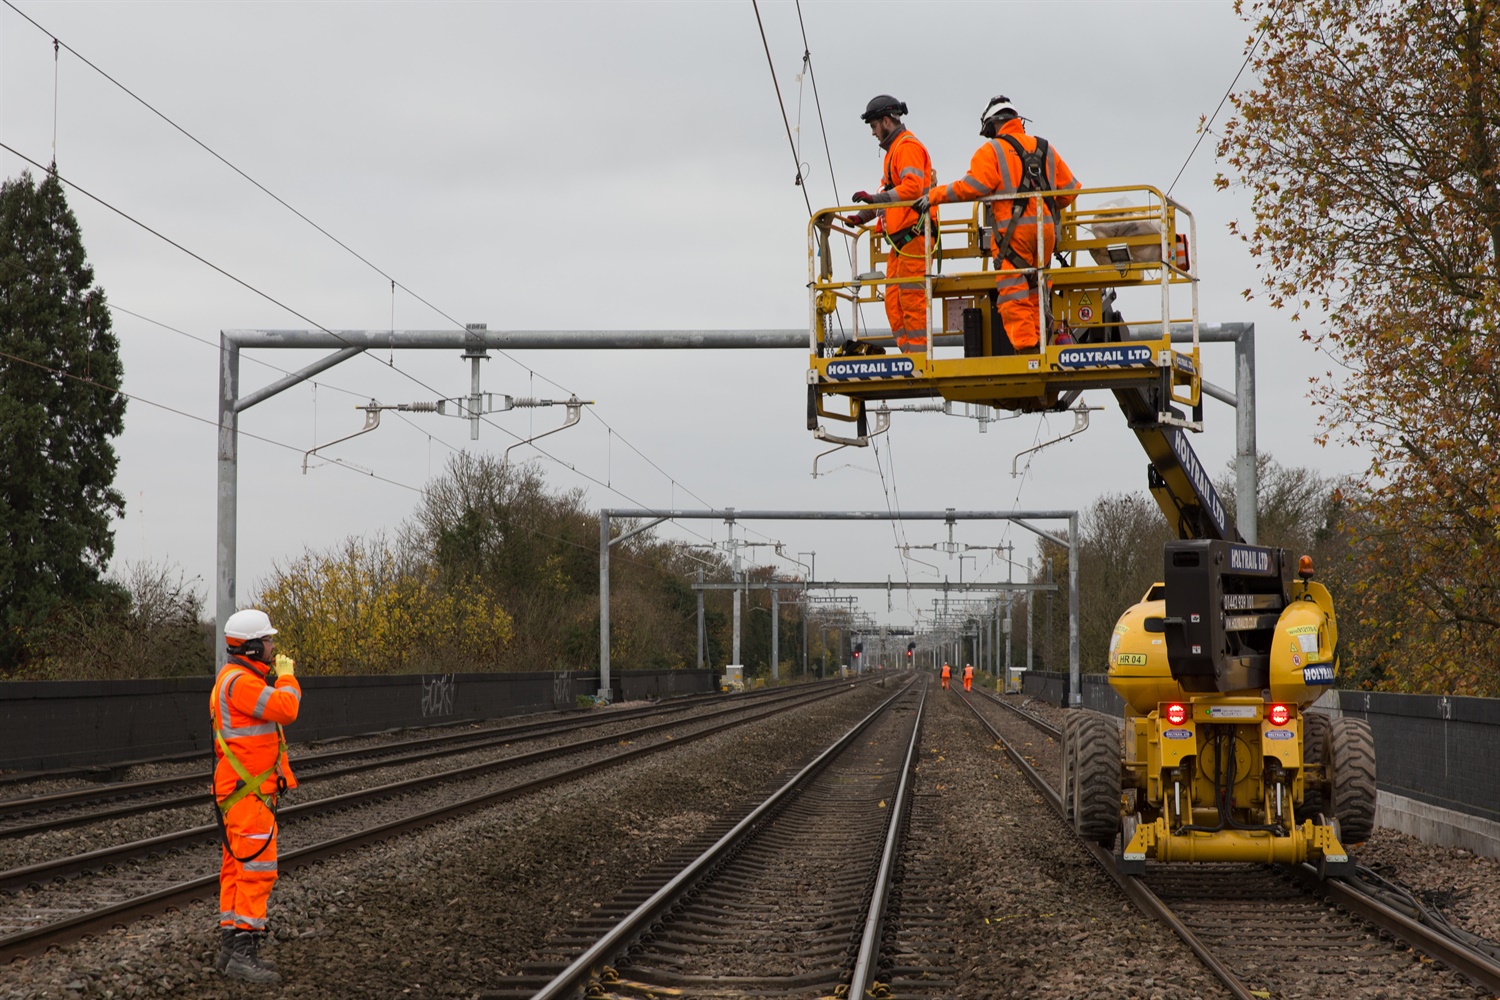 GOBLIN electrification on track for January 2018 completion